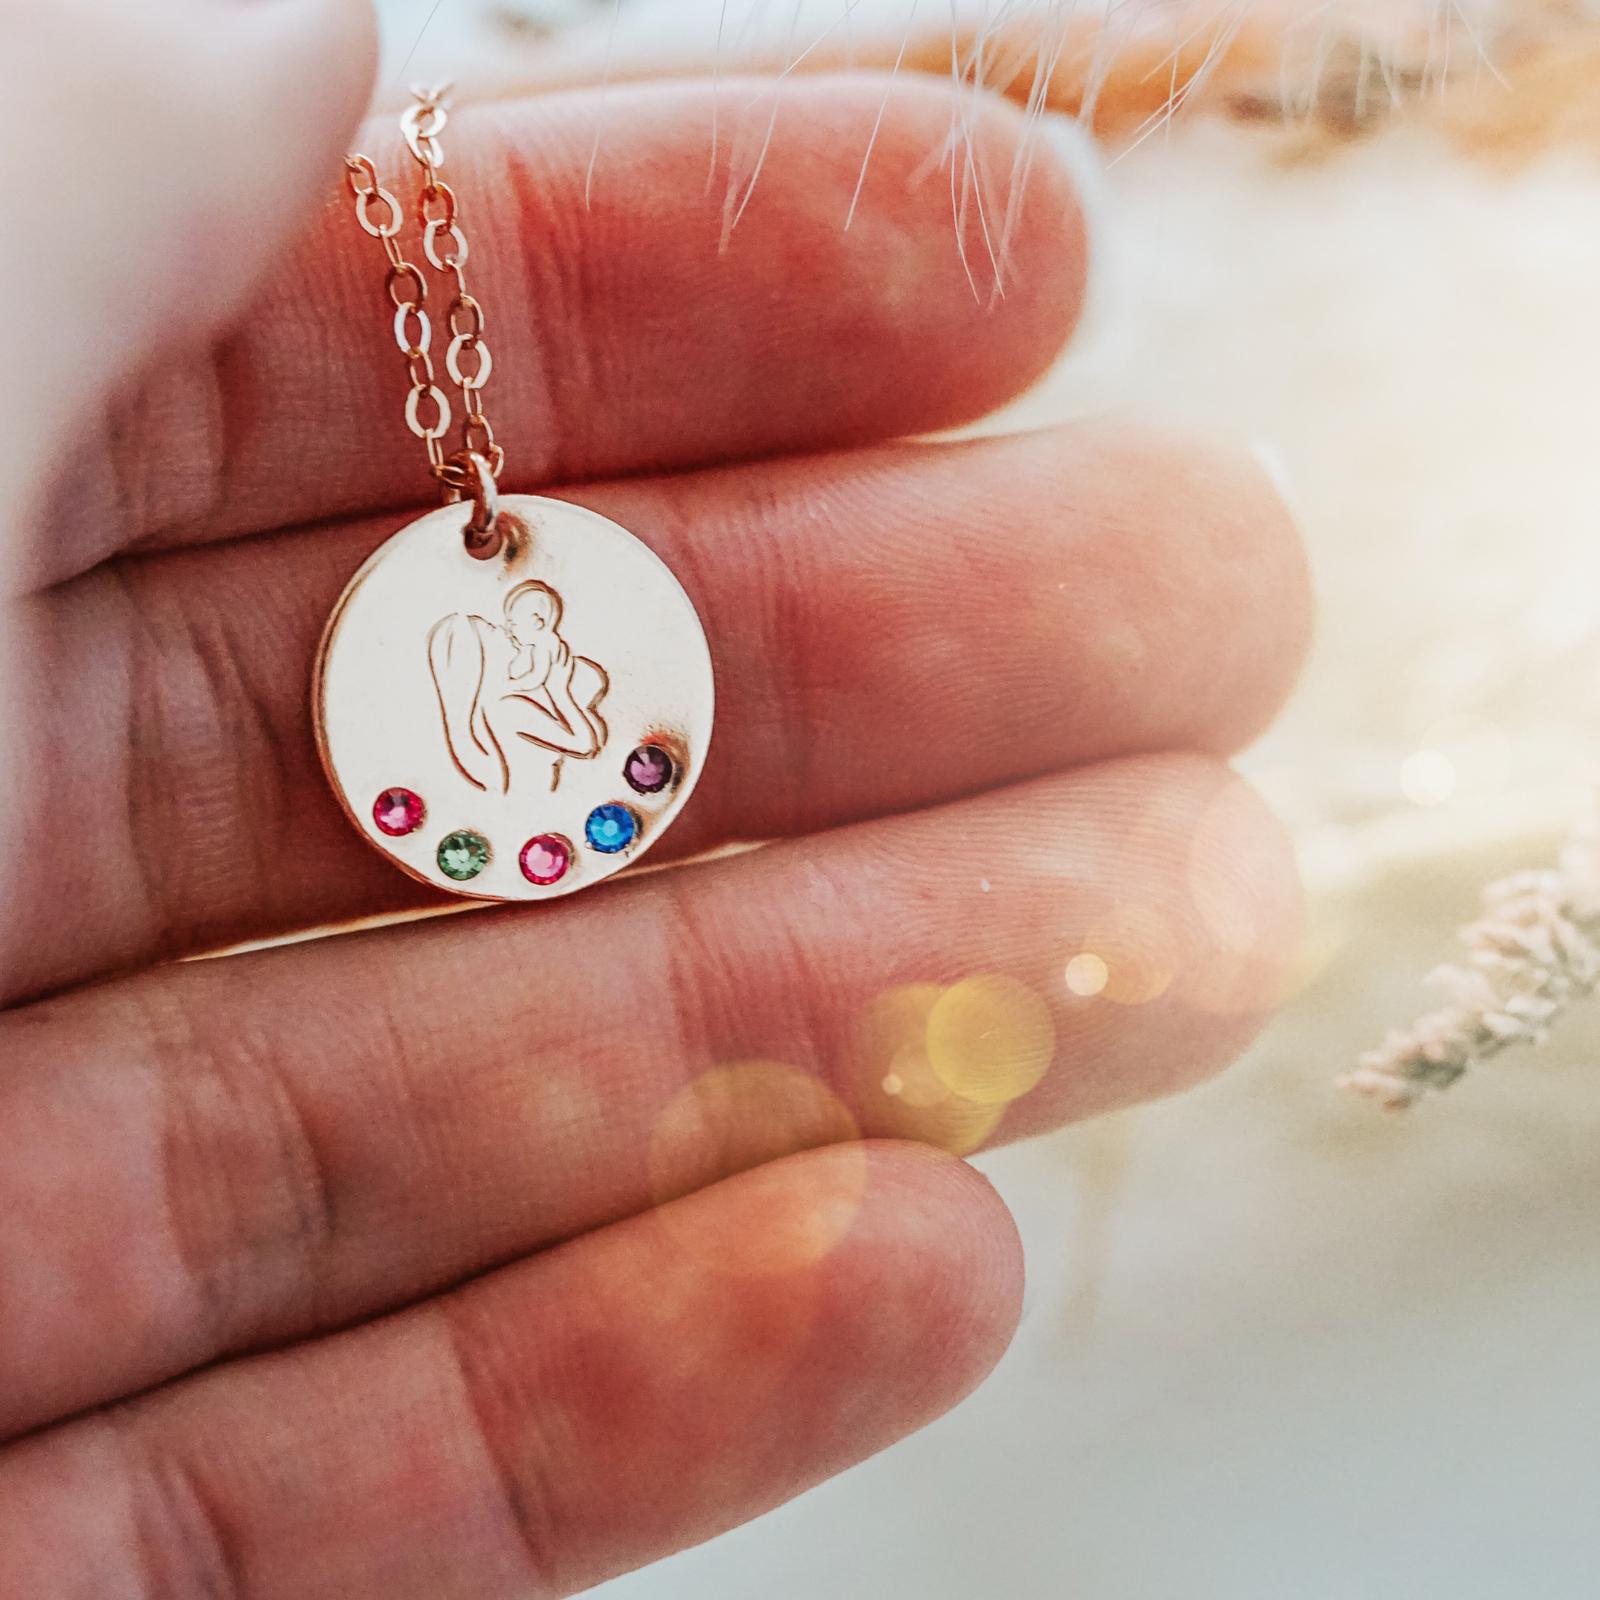 Woman and Child Birthstone Necklace - Large Disc